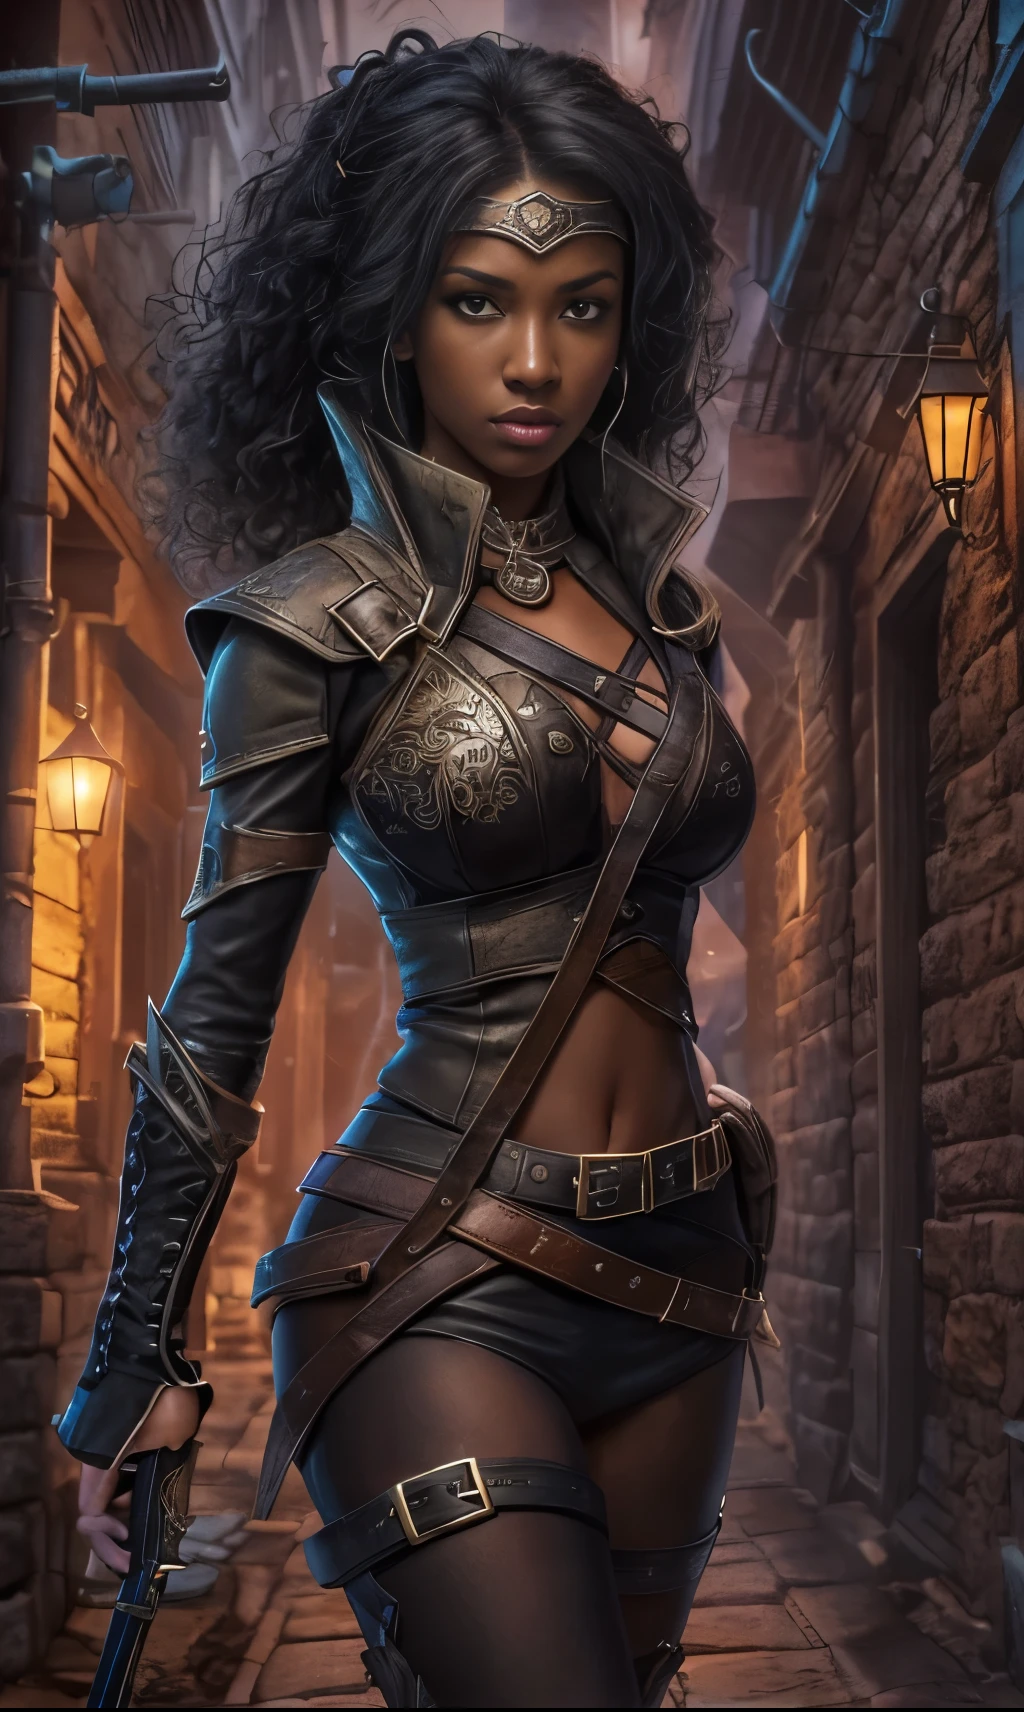 (a detailed female rogue,a black-skinned female rogue,a black skinned female rogue with an intense expression)black female rogue,sneaking through an alley in a medieval town,leather armor with a skimpy design,showing a hint of sensuality,black patterned pantyhose,curly black hair,flowing and vibrant,holding a leather whip in one hand as a weapon,giving her an agile and dangerous aura,medieval-themed alley,with dim and flickering lanterns casting a mysterious and eerie light,ancient architecture towering on both sides of the alley,adding a sense of history and atmosphere